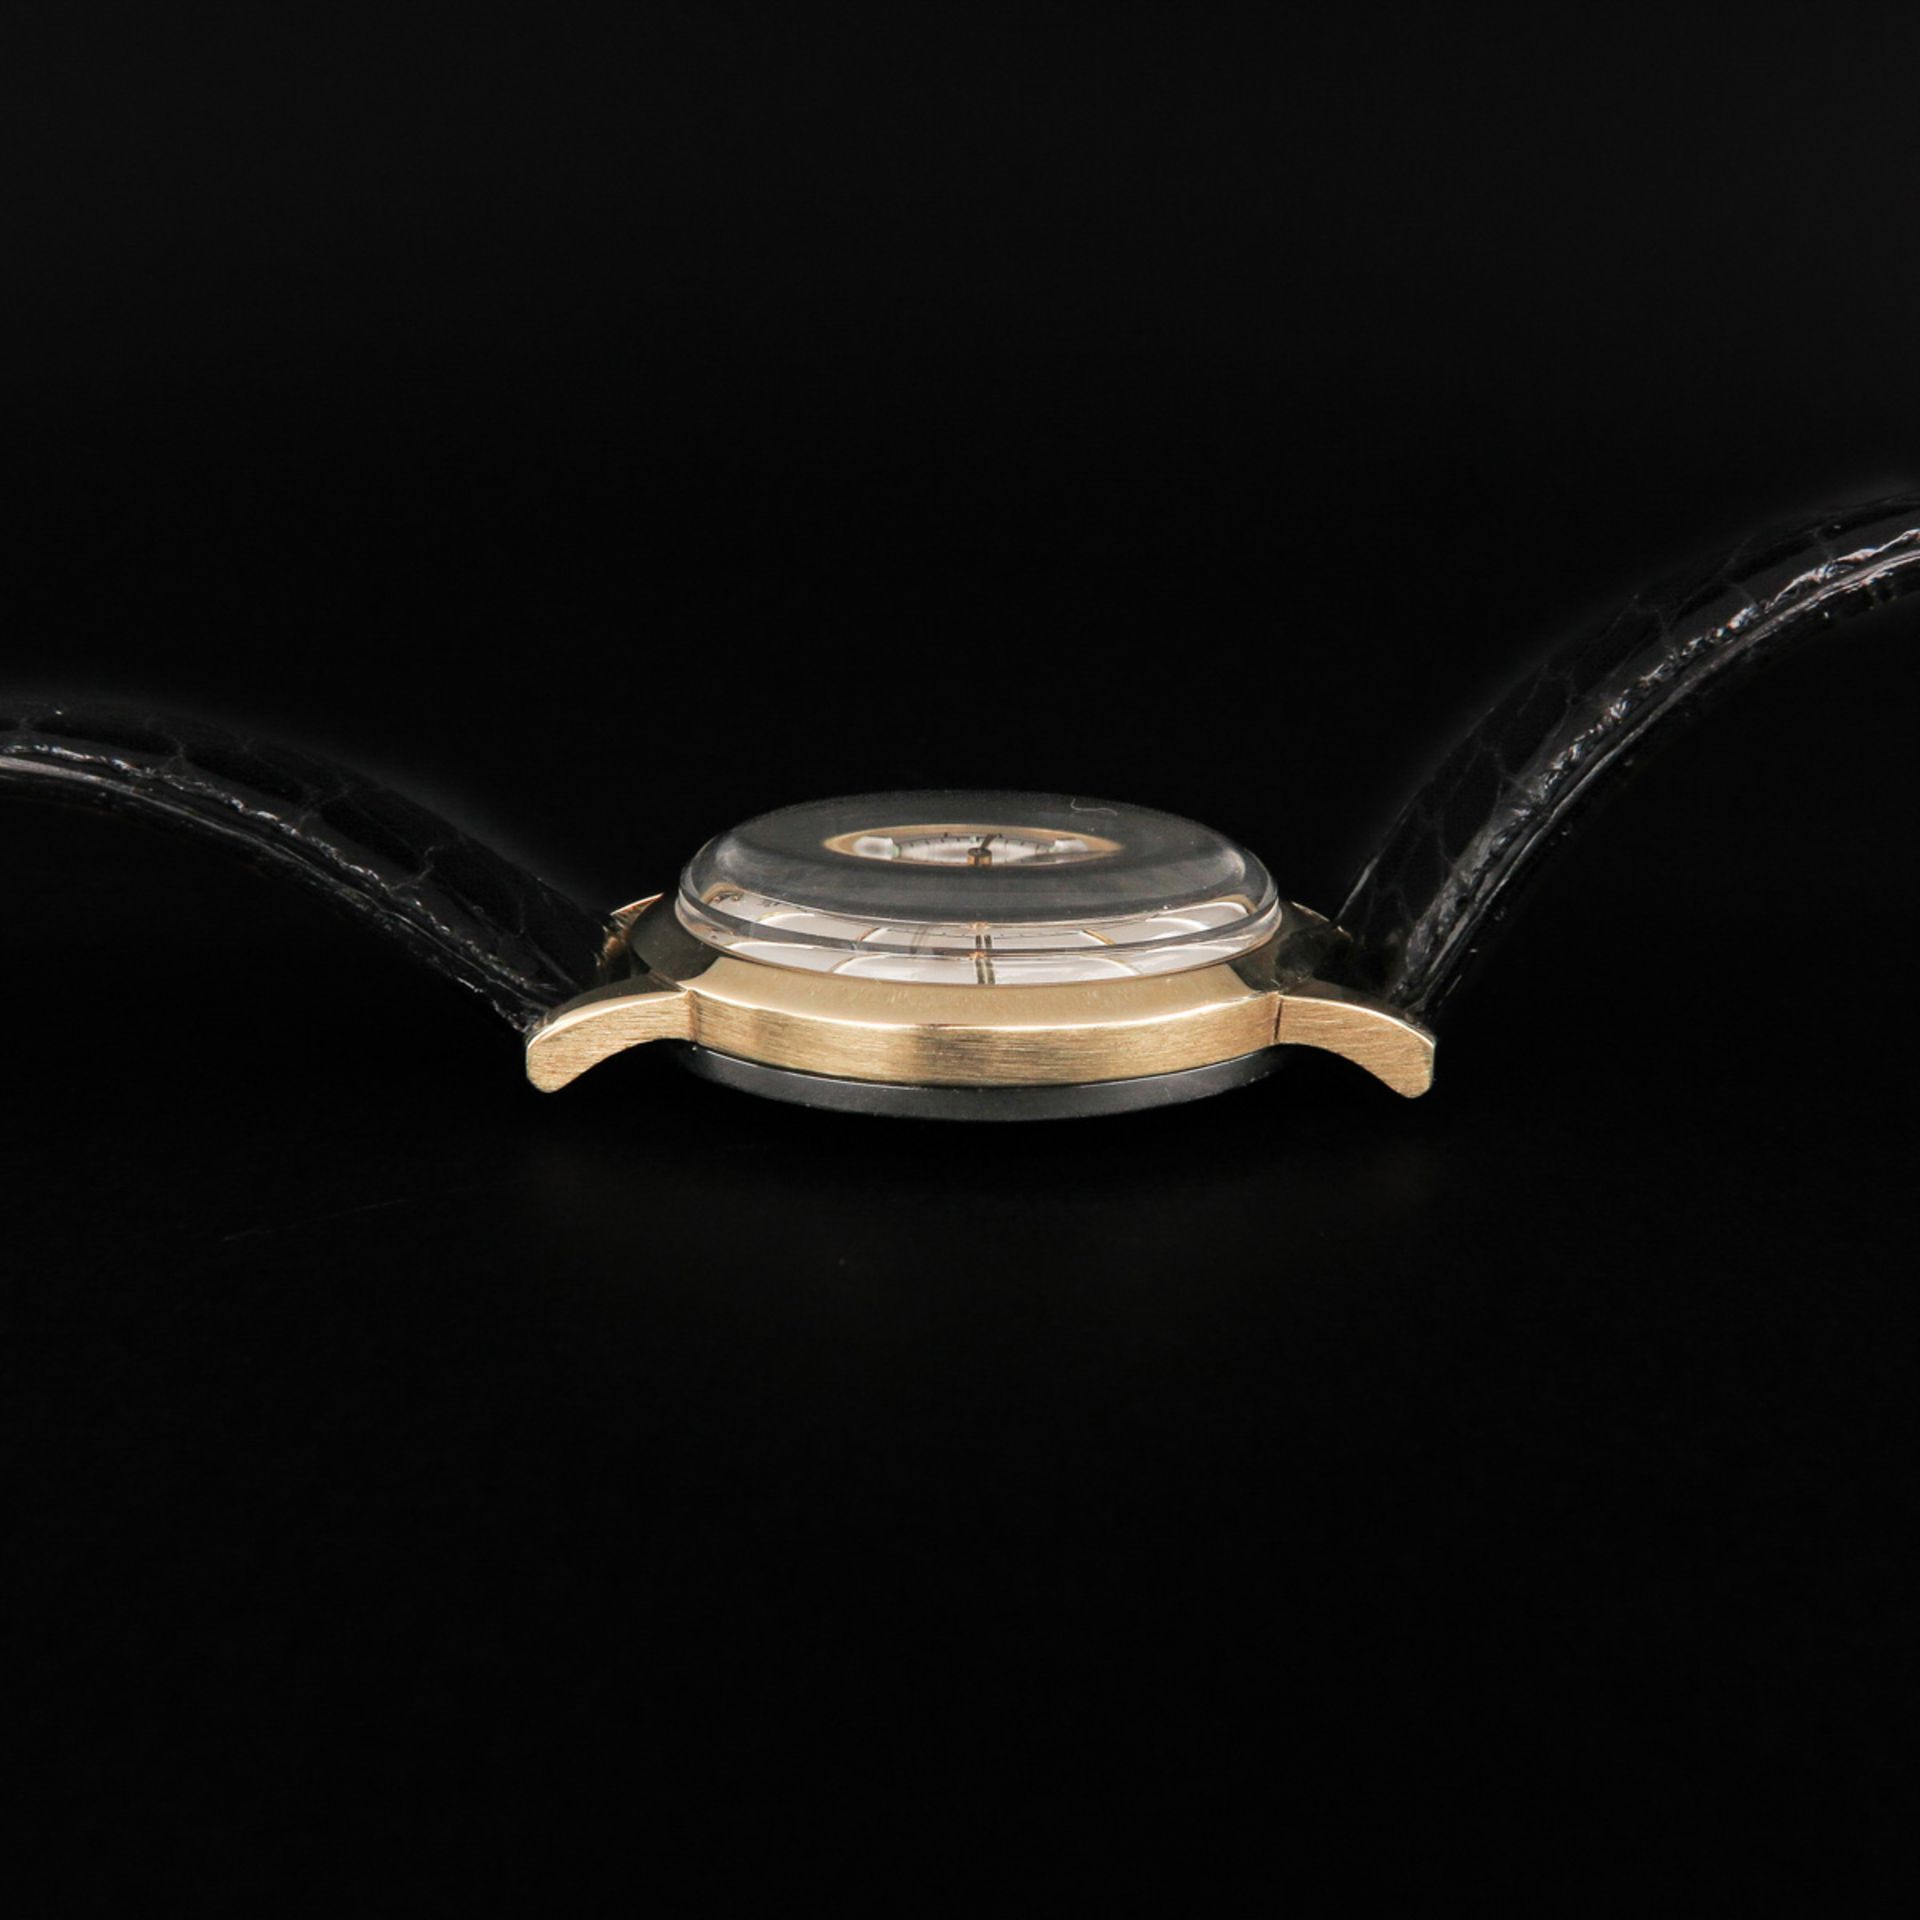 A Mens Jaeger-LeCoultre Watch - Image 6 of 10